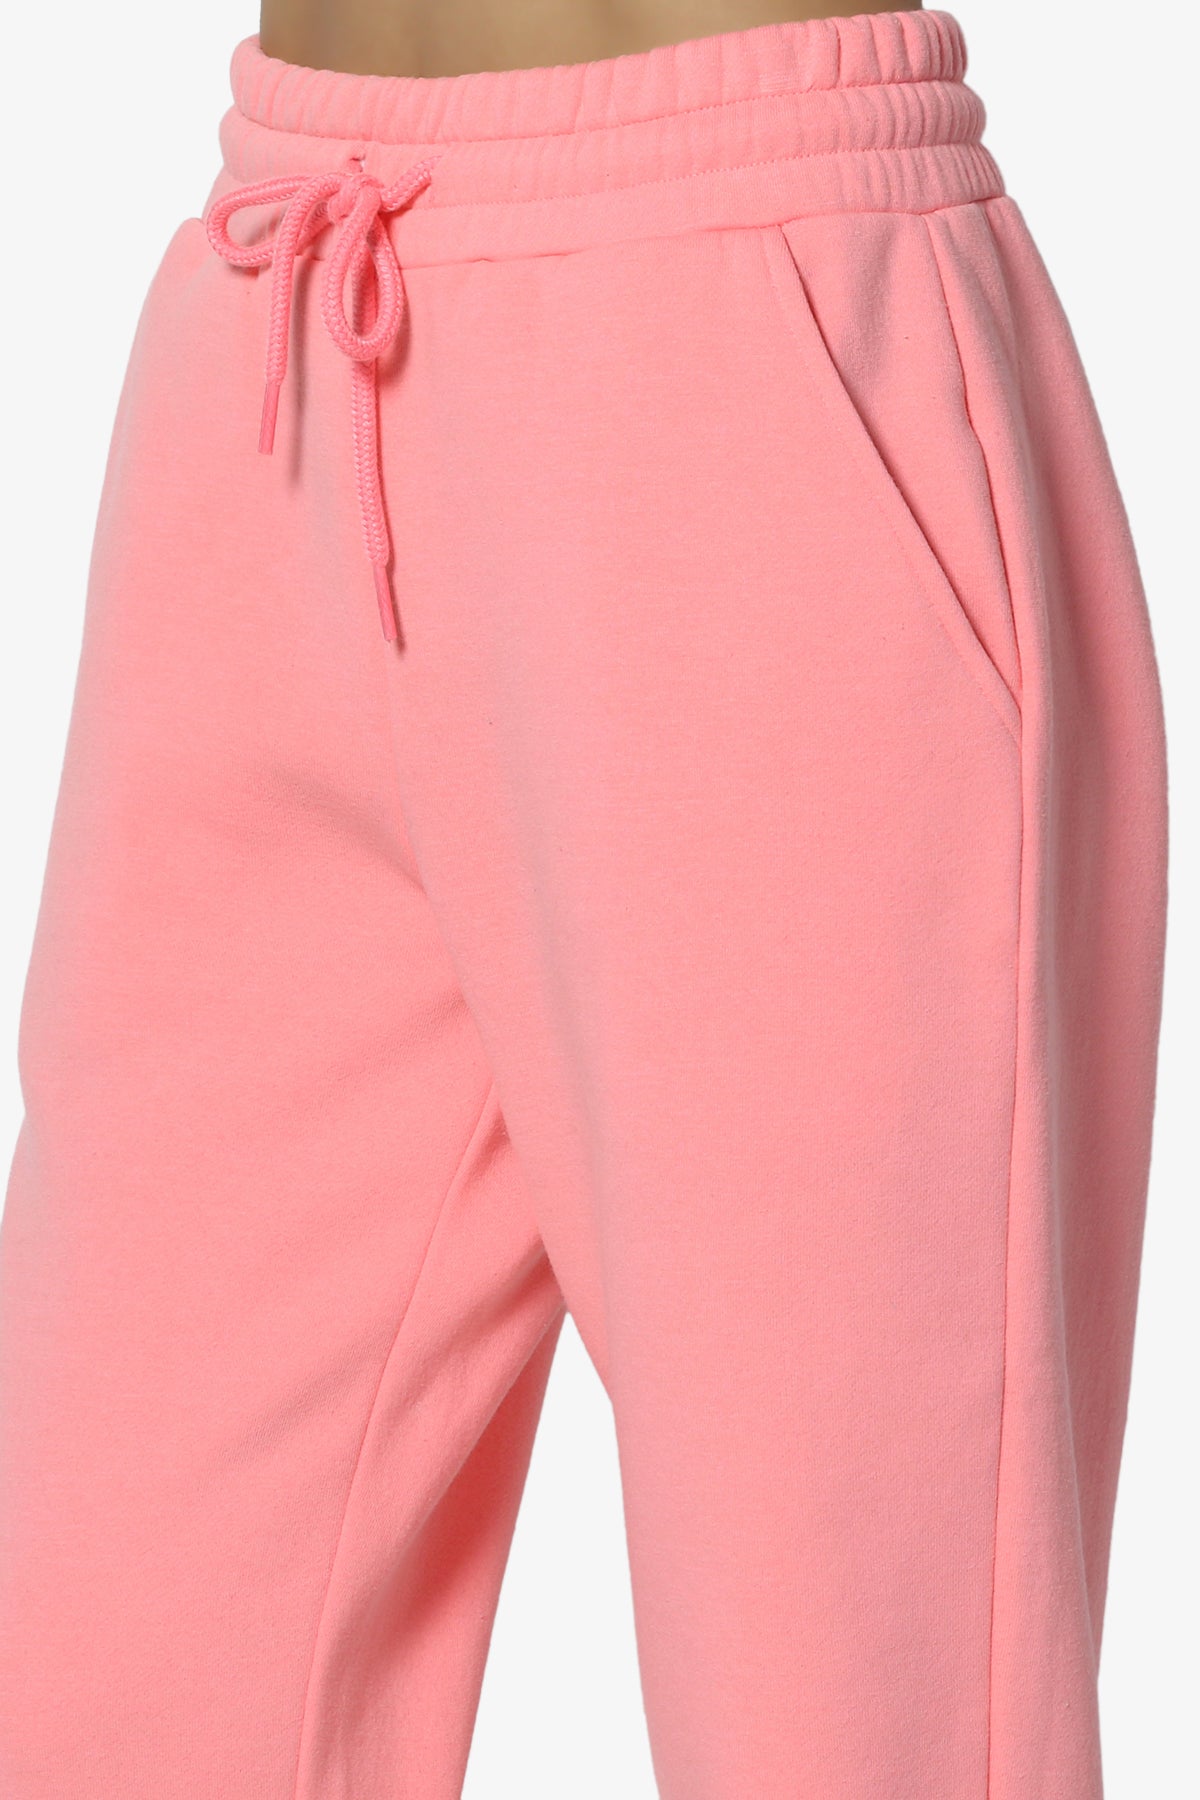 safuny Women's Sweatpants Jogger Pants Girls Teen Relaxed Casual Comfy  Workout Elastic Waist Drawstring Trendy Trousers Solid Color Button Hot  Pink M